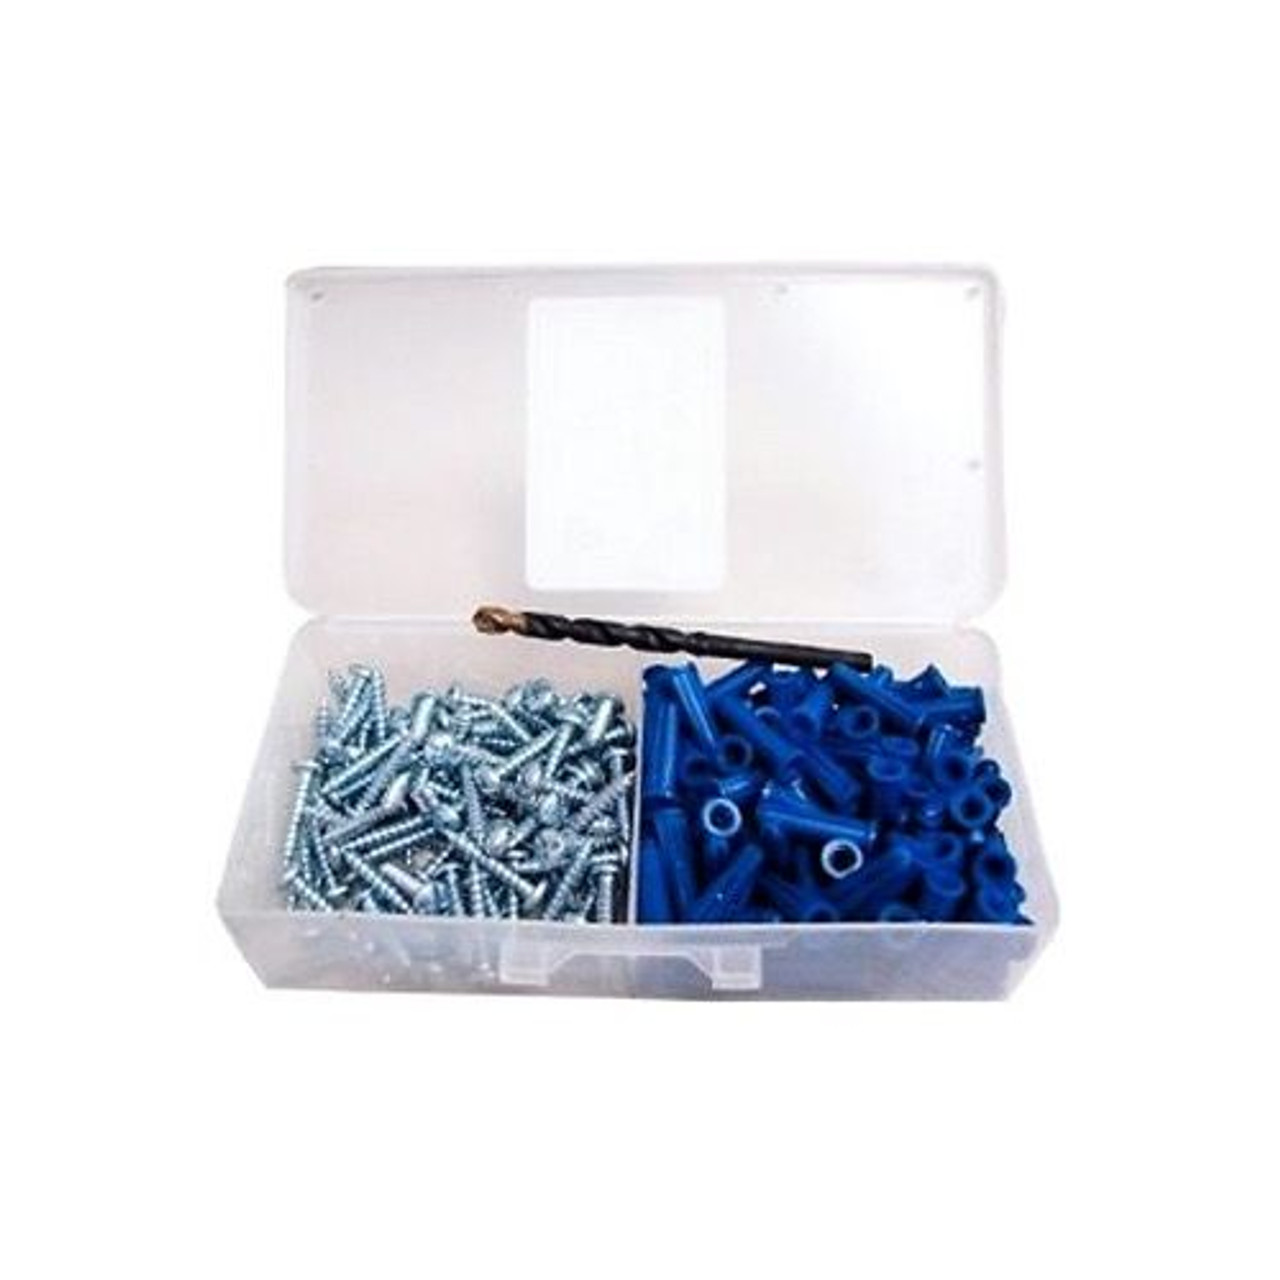 Eagle Masonry Anchor Kit 100 Piece Plastic Concrete Mounting with #8 Screw 3/16" Drill Bit in Plastic Case, Home Improvement Set